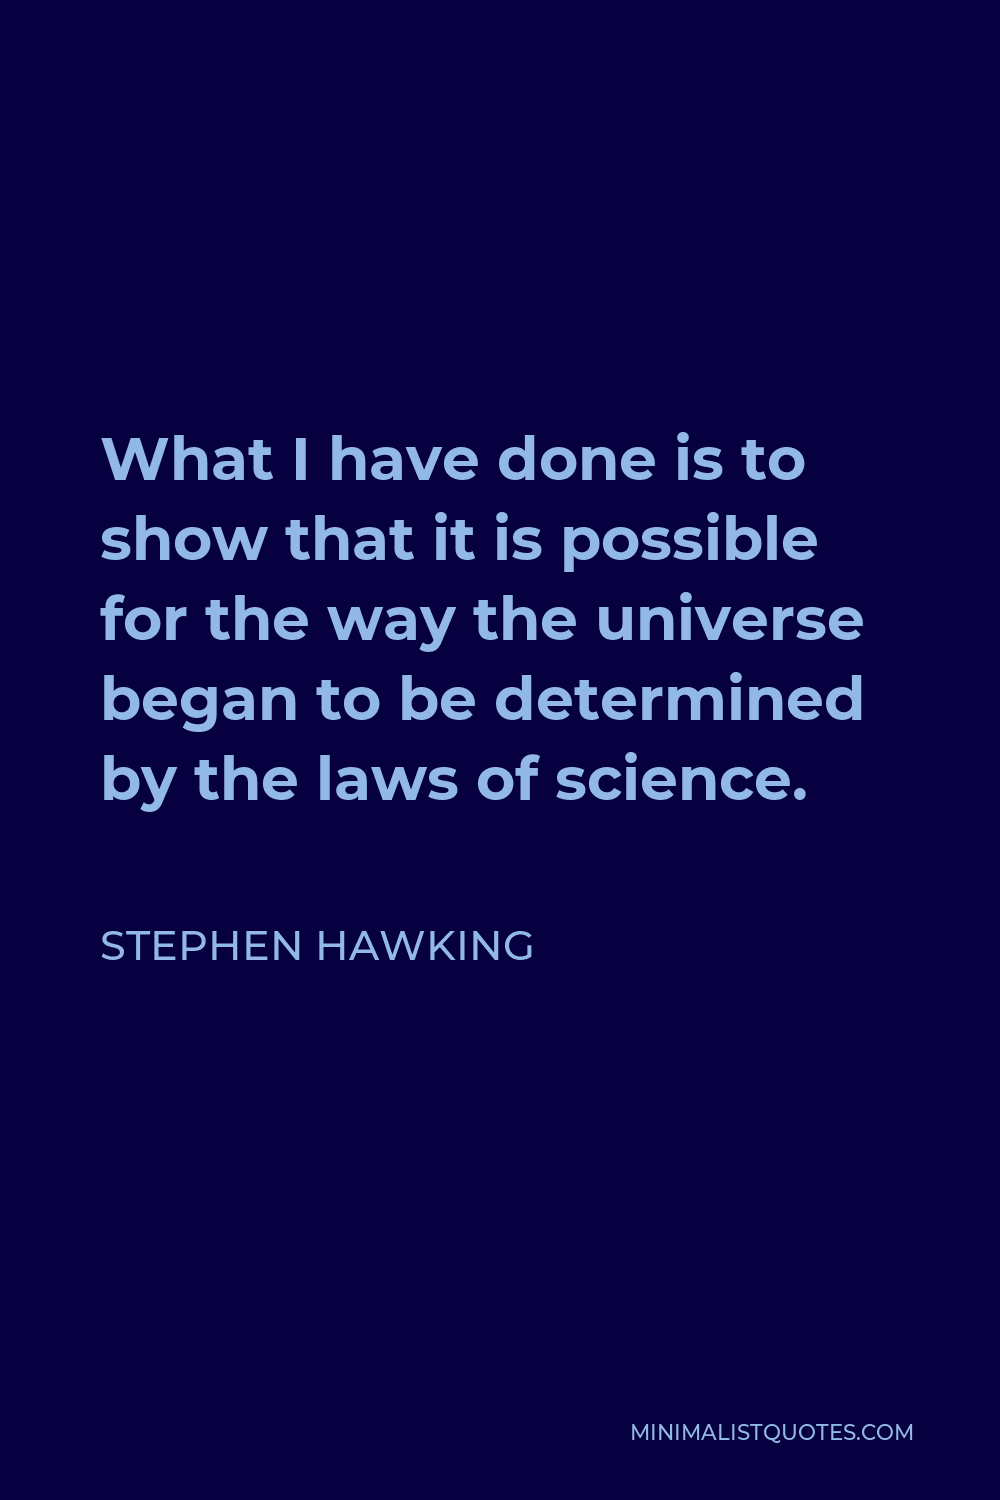 Stephen Hawking Quote - What I have done is to show that it is possible for the way the universe began to be determined by the laws of science.